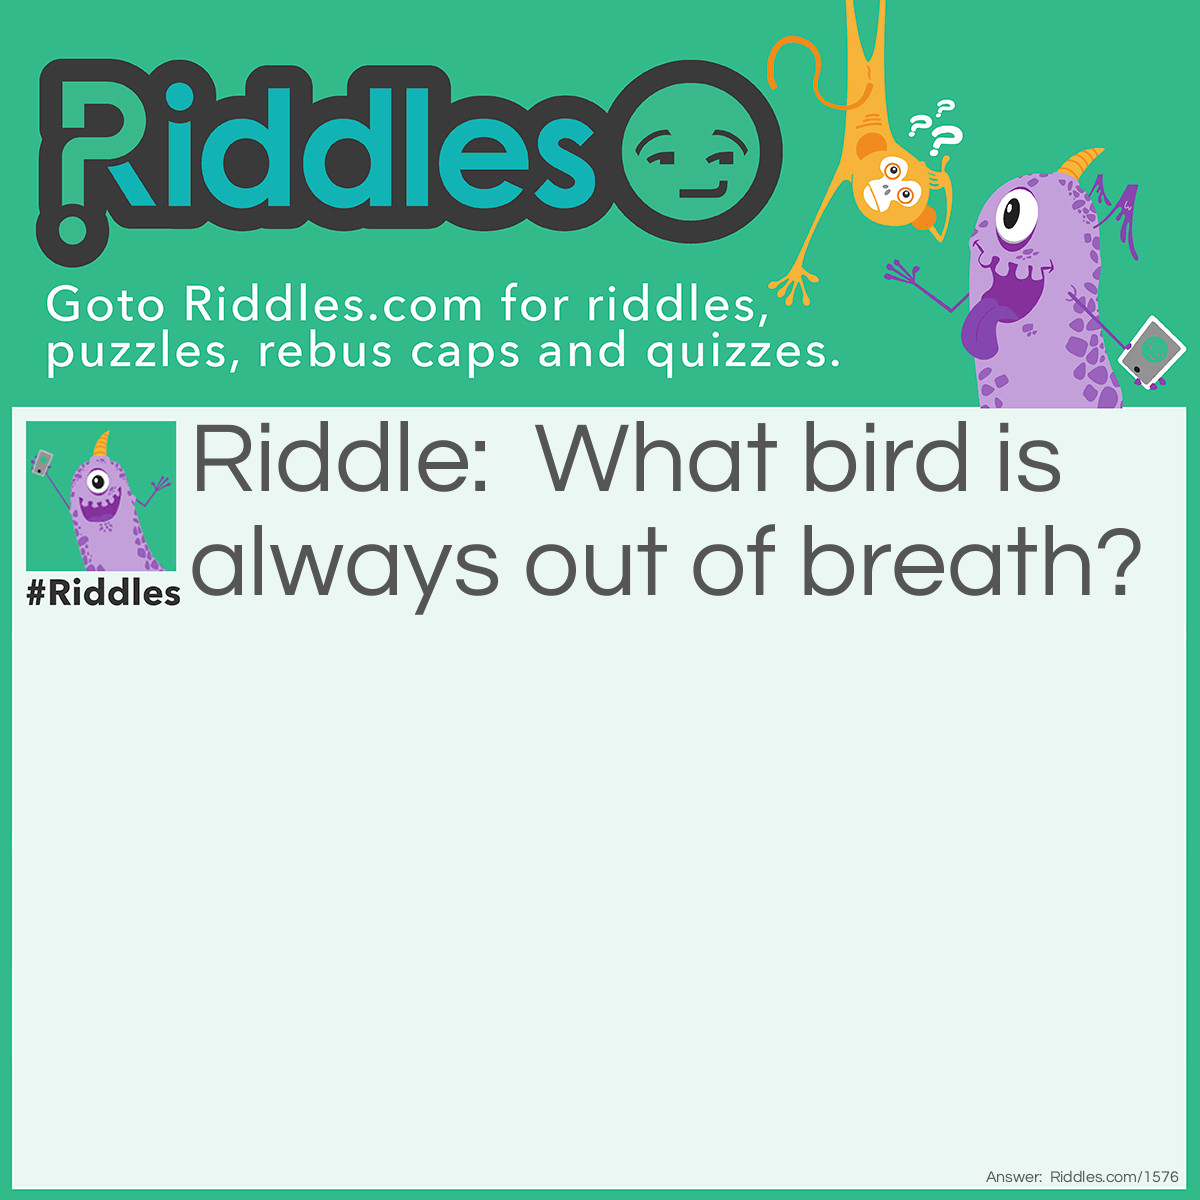 Riddle: What bird is always out of breath? Answer: A puffin.